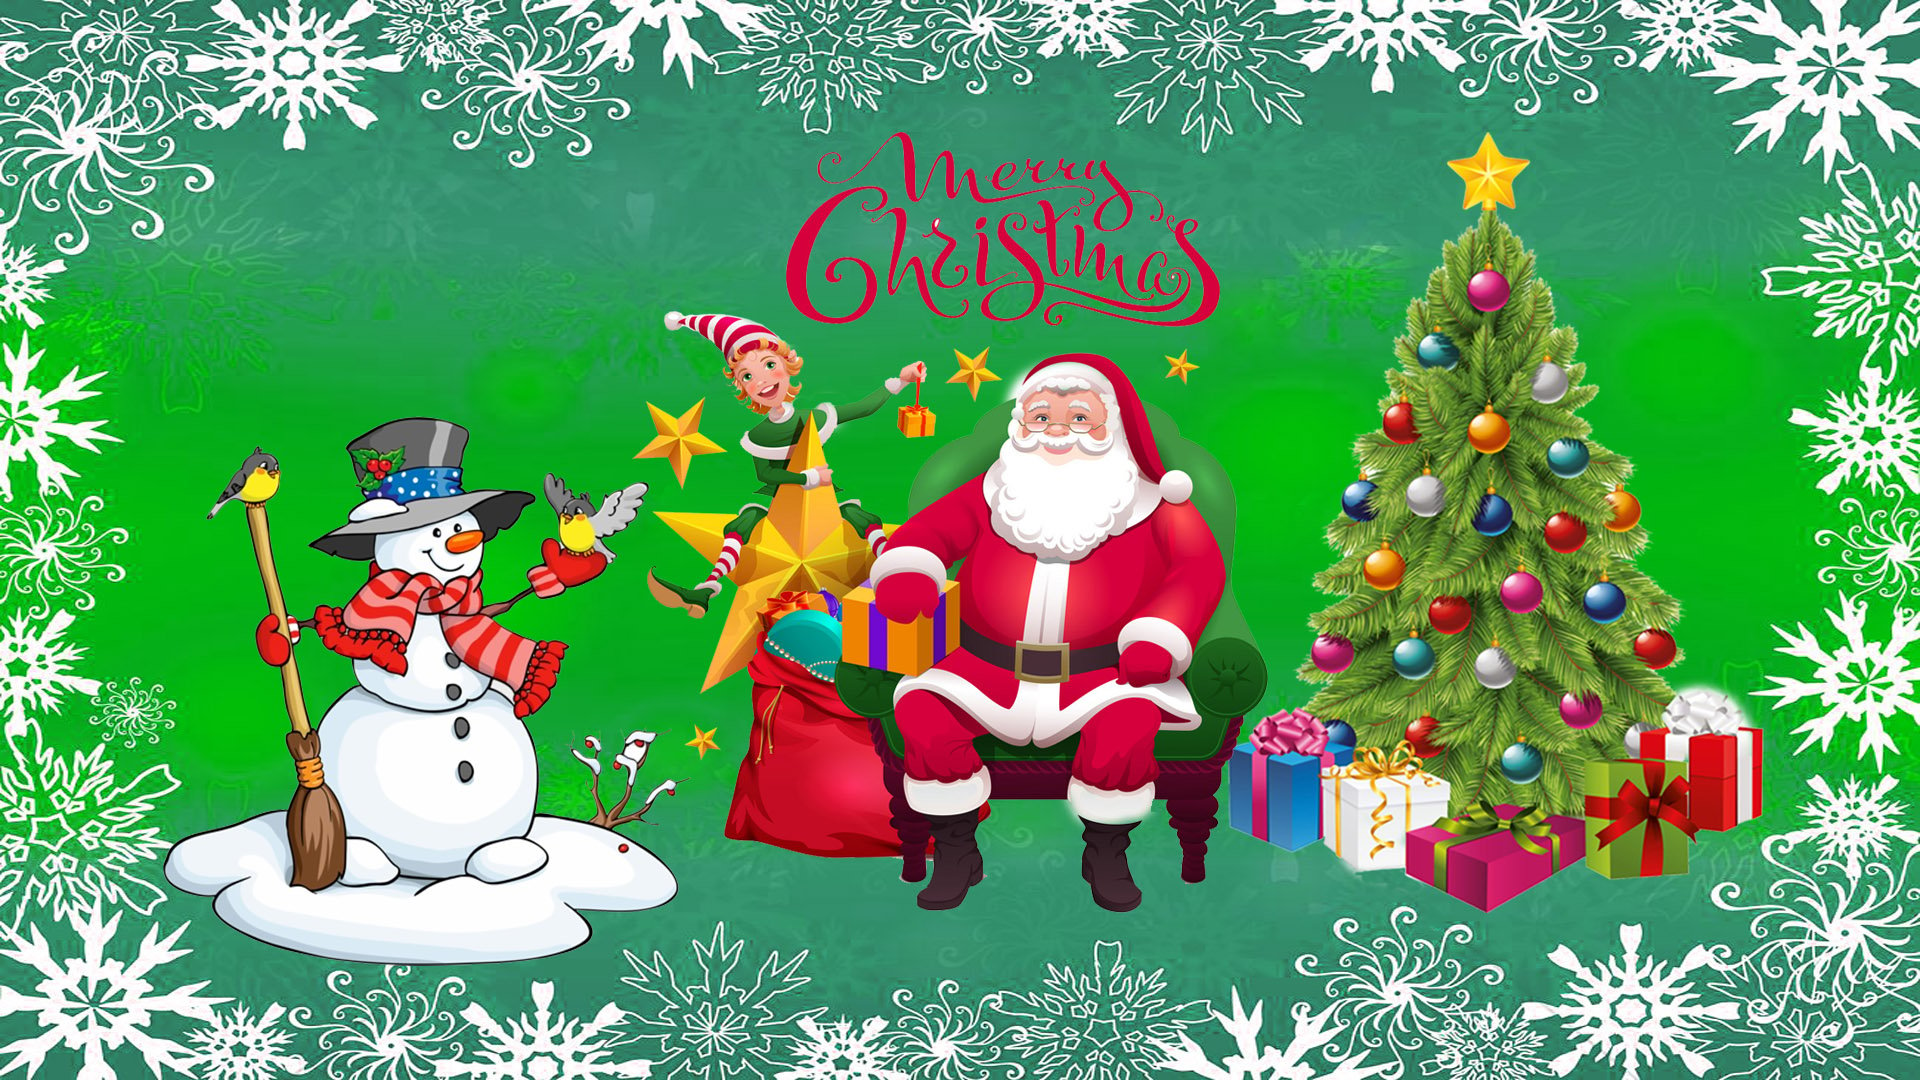 Merry Christmas Santa With Gift Christmas Tree With Decorations Snowman Wallpaper HD, Wallpaper13.com